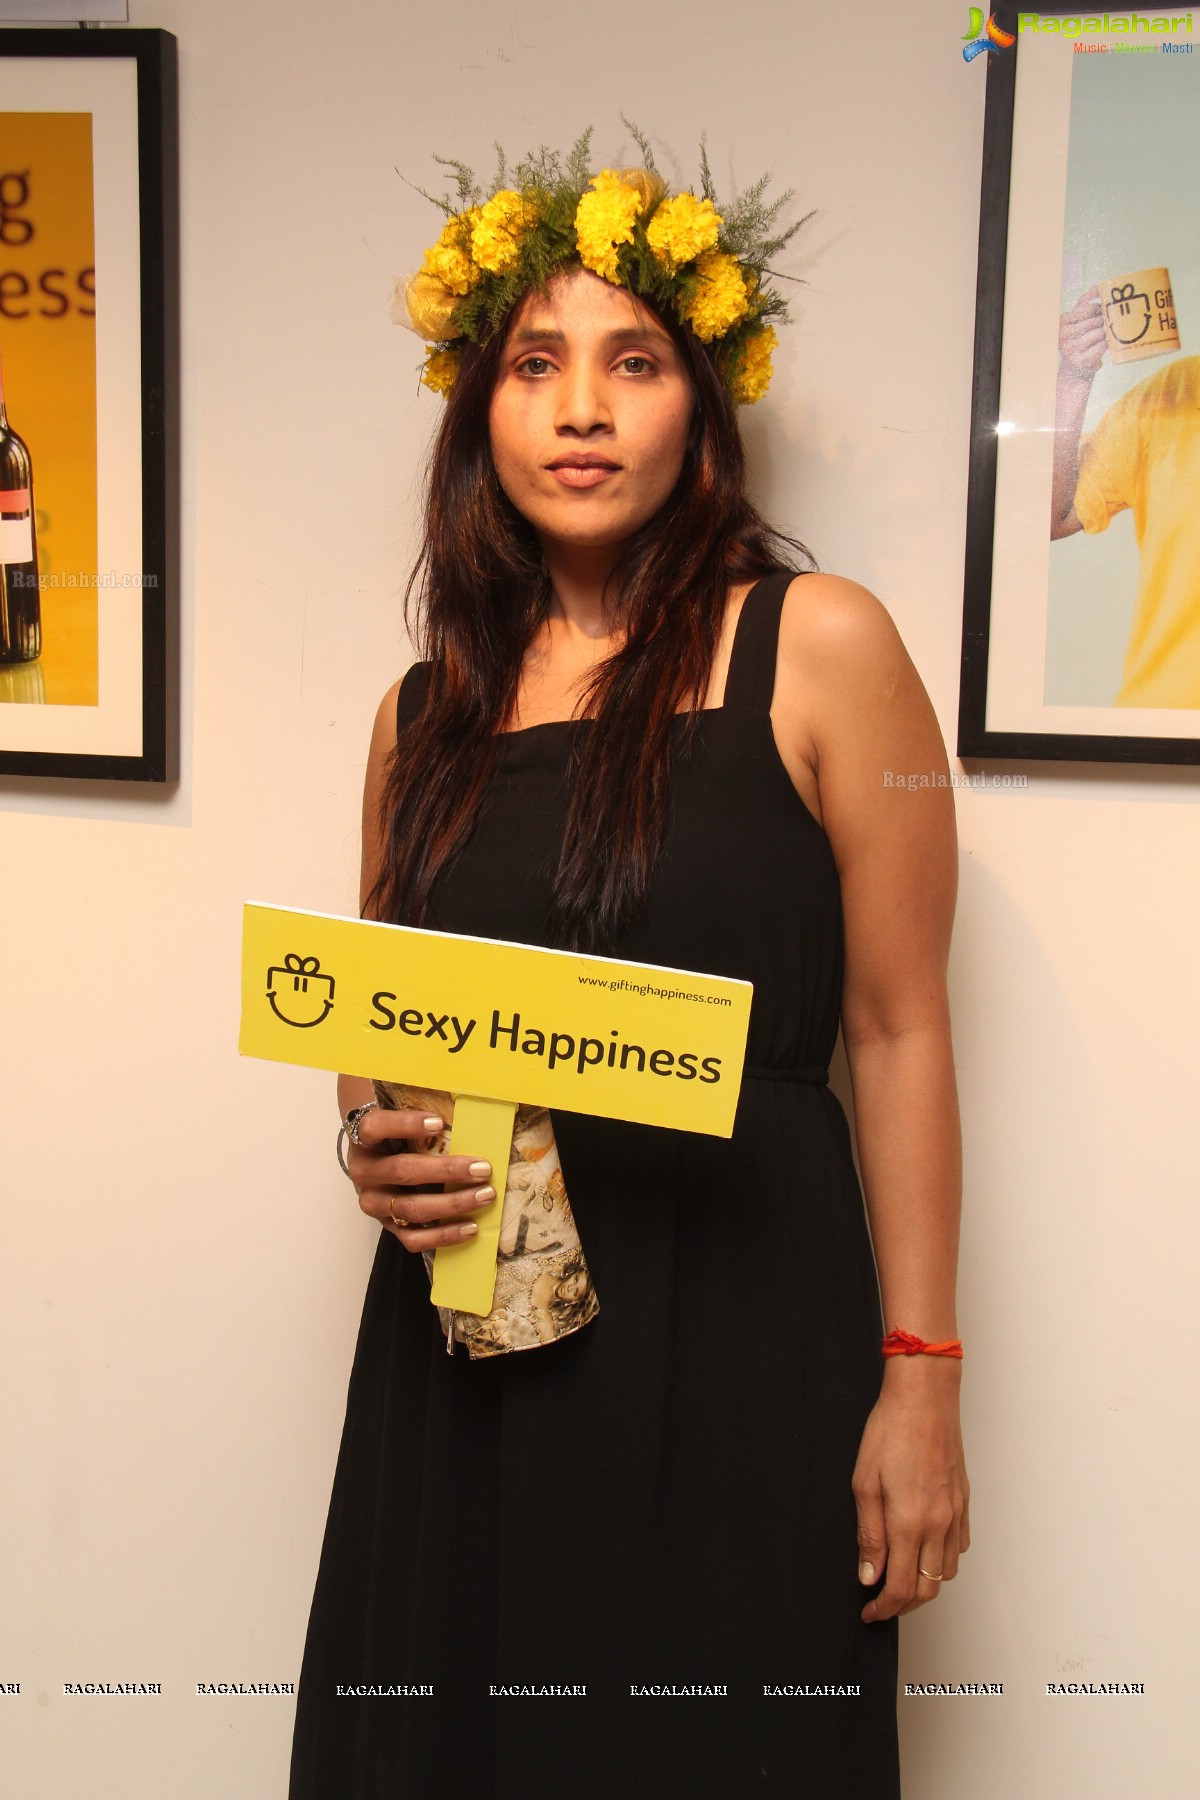 Colors of Happiness - A Photography Show at Muse Art Gallery, Hyderabad